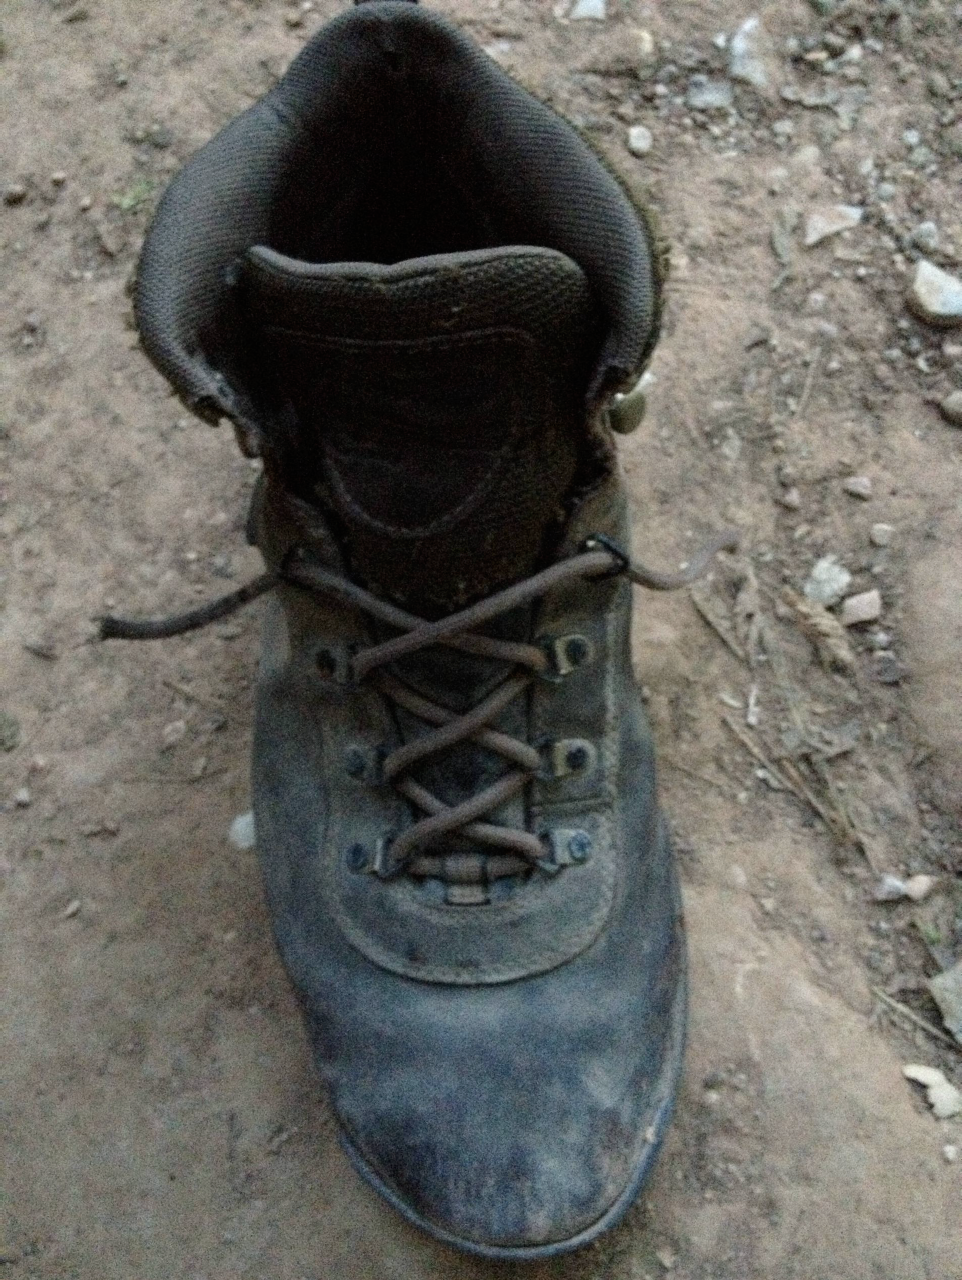 "A squirrel chewed through my boot laces."